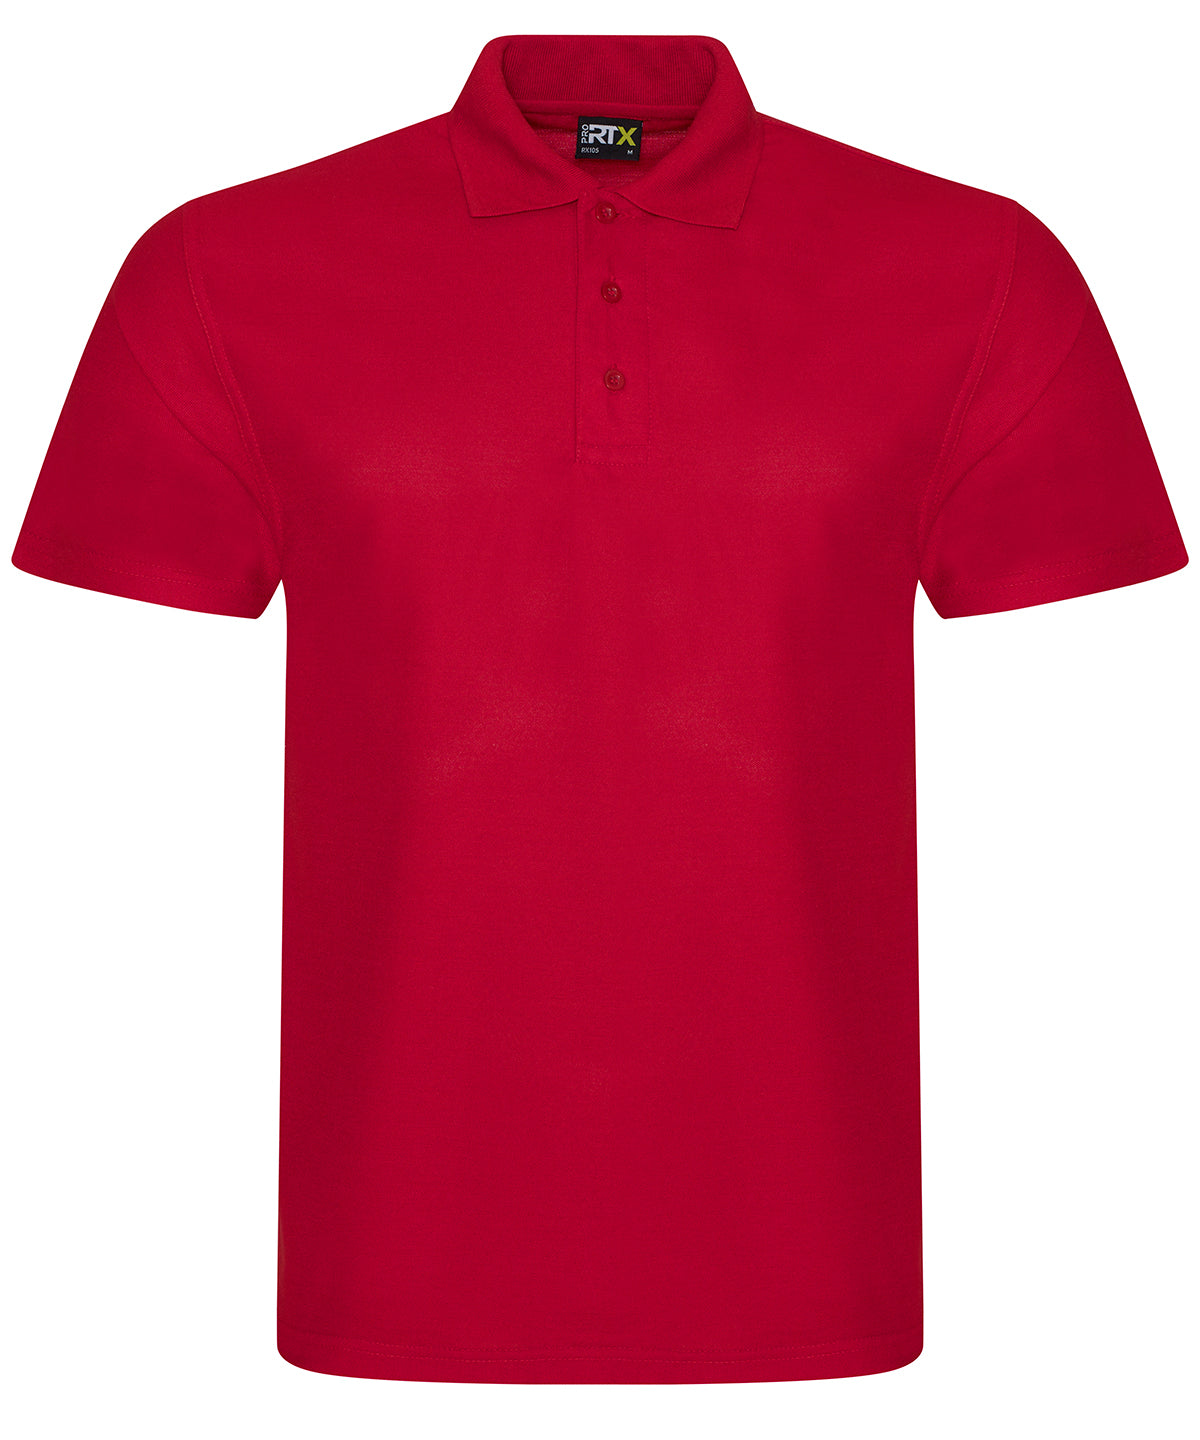 Personalised Polo Shirts - Black ProRTX Pro polyester polo